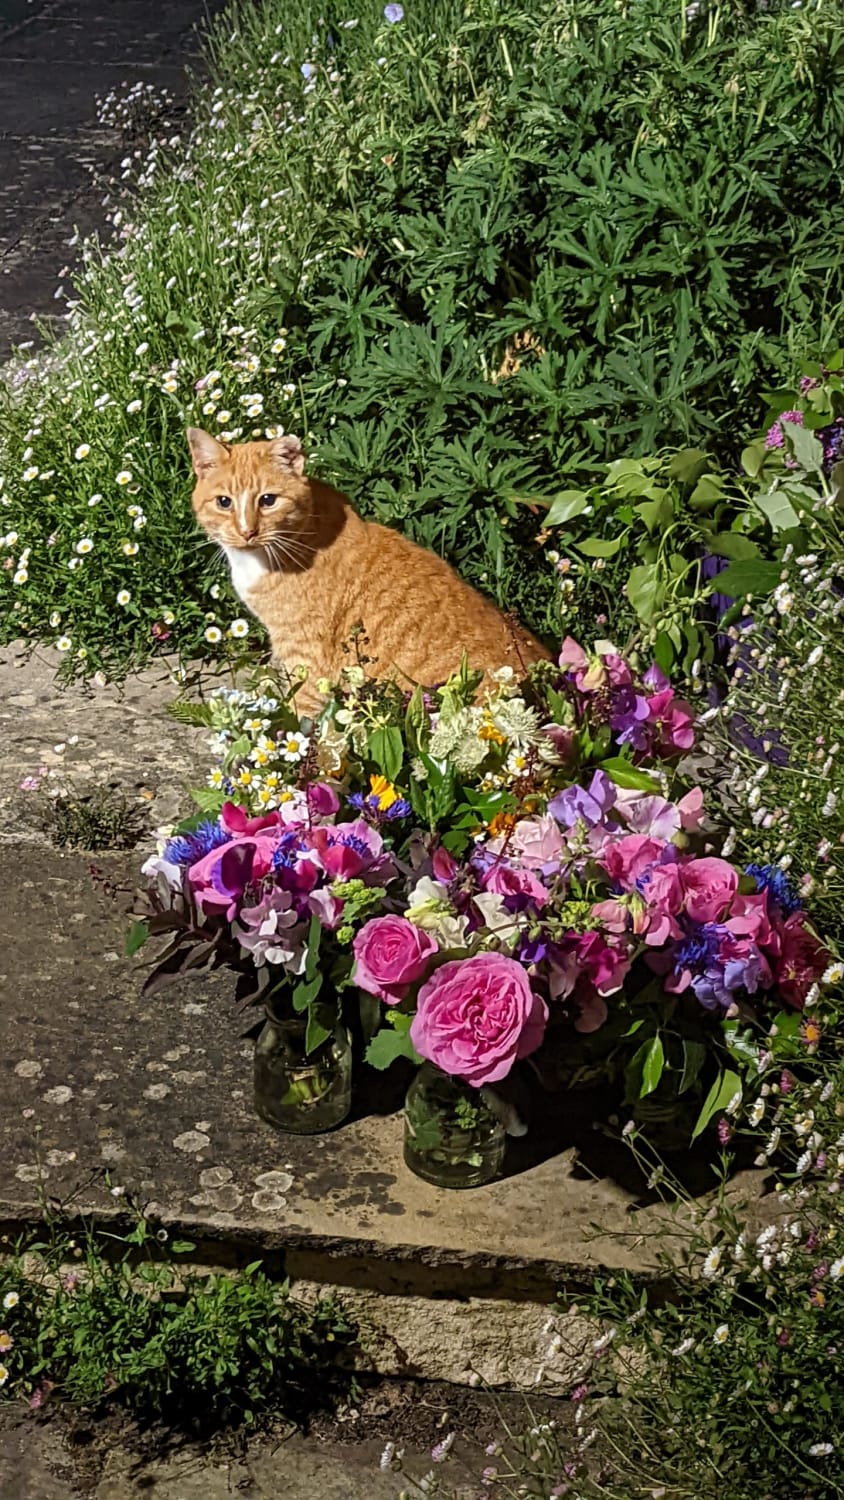 Florist cat hopes you enjoy the flowers he has prepared. The invoice is in the post.